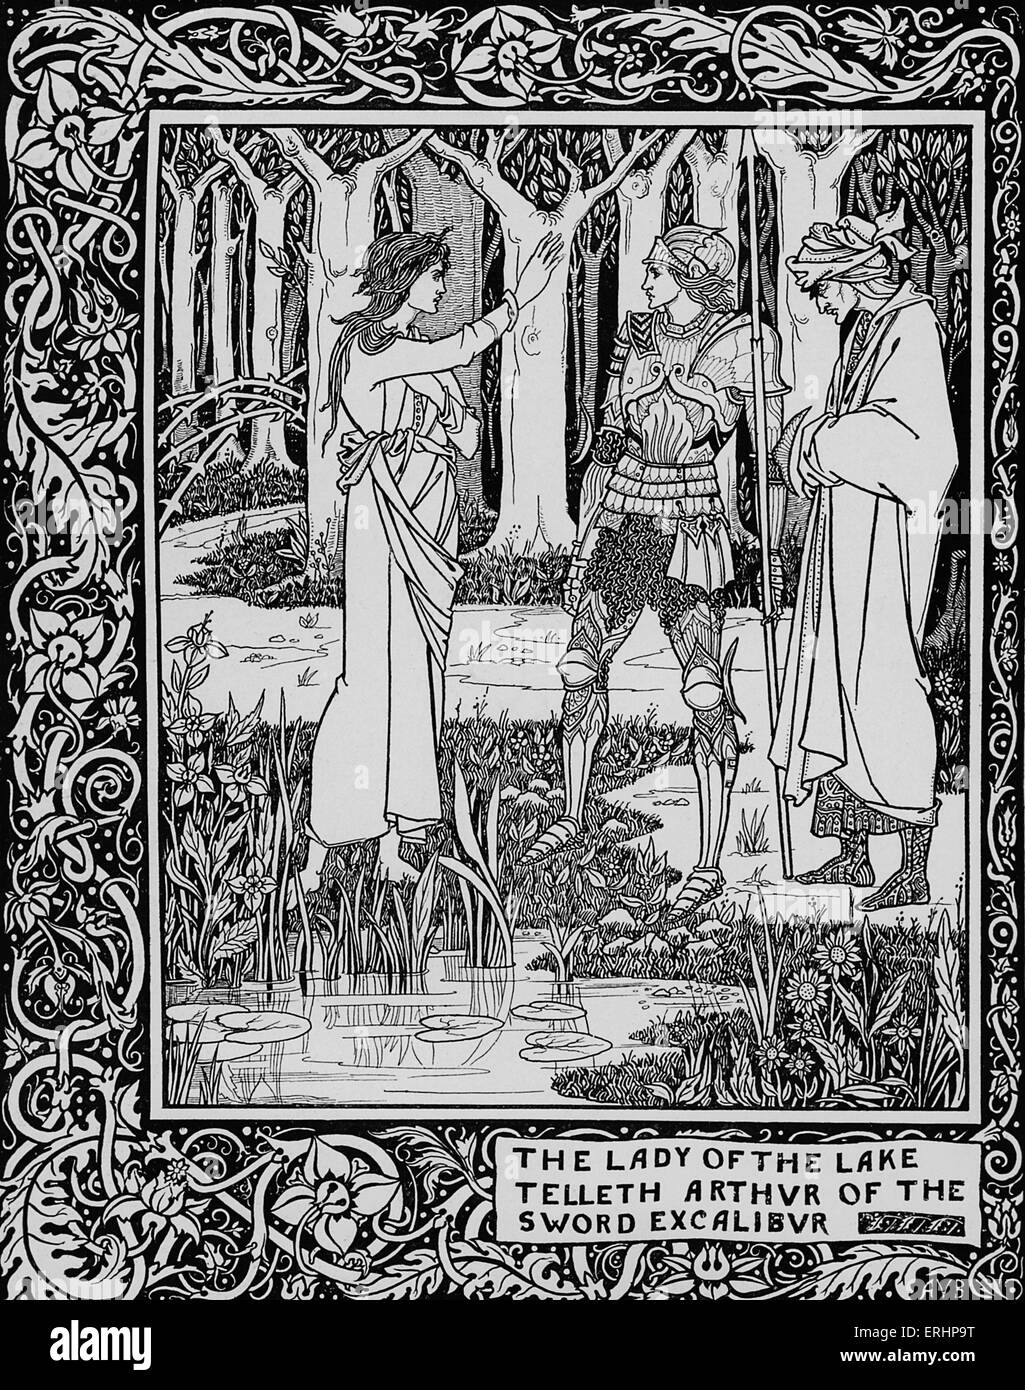 Thomas Malory (d.1471) Morte d'Arthur. Morgan le Fay casts spell on Merlin.  Engraving after Henry Ryland (1856-1924) English painter and illustrator  Stock Photo - Alamy